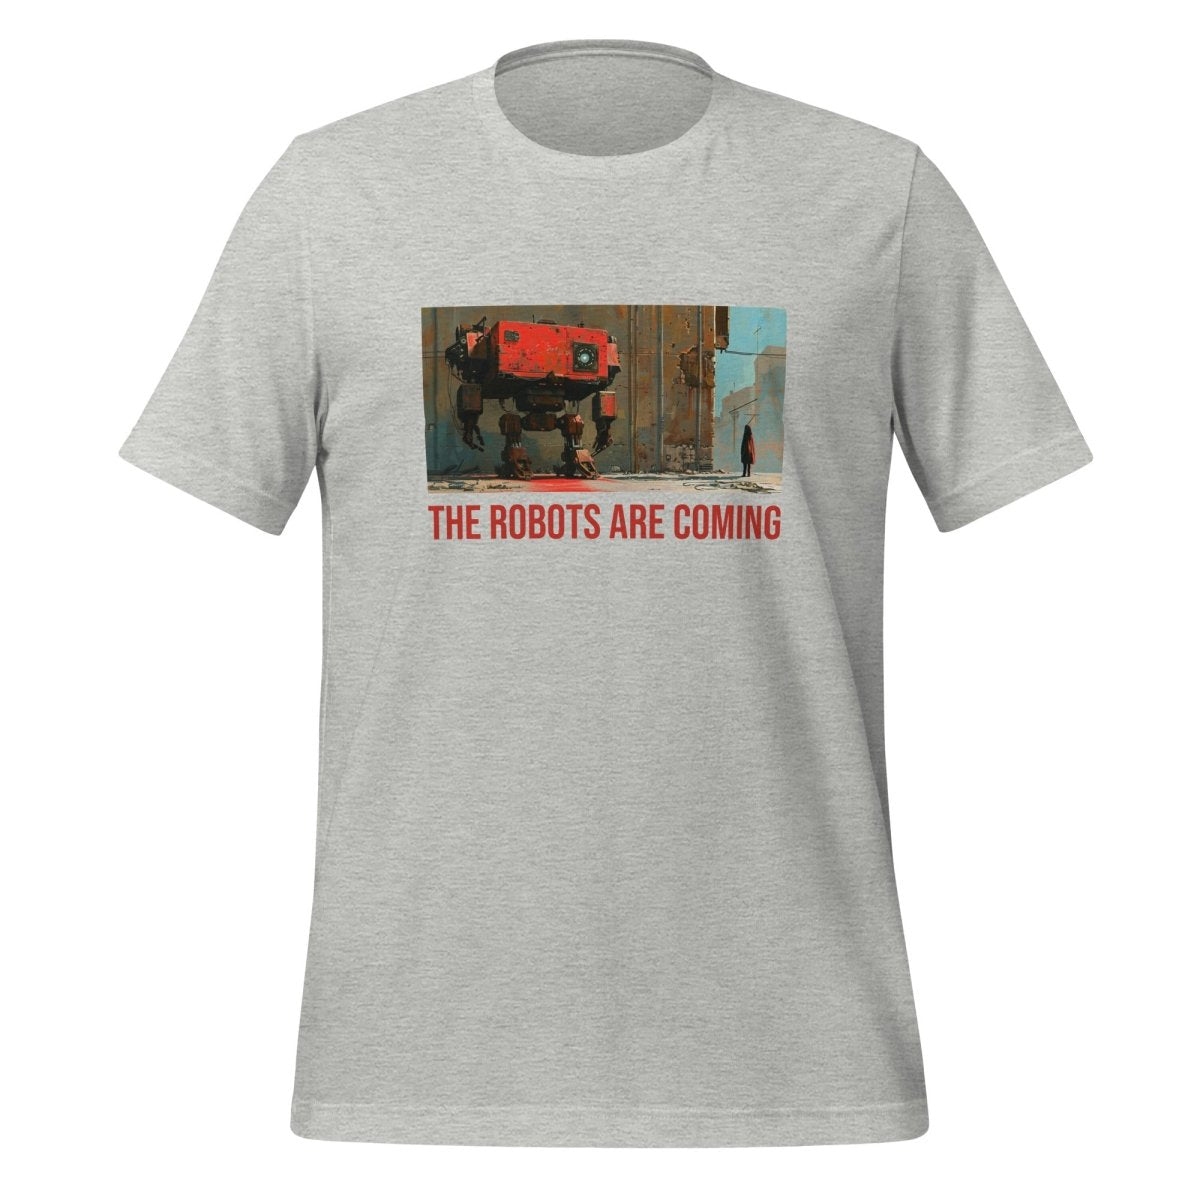 Illustrated The Robots Are Coming T - Shirt (unisex) - Athletic Heather - AI Store